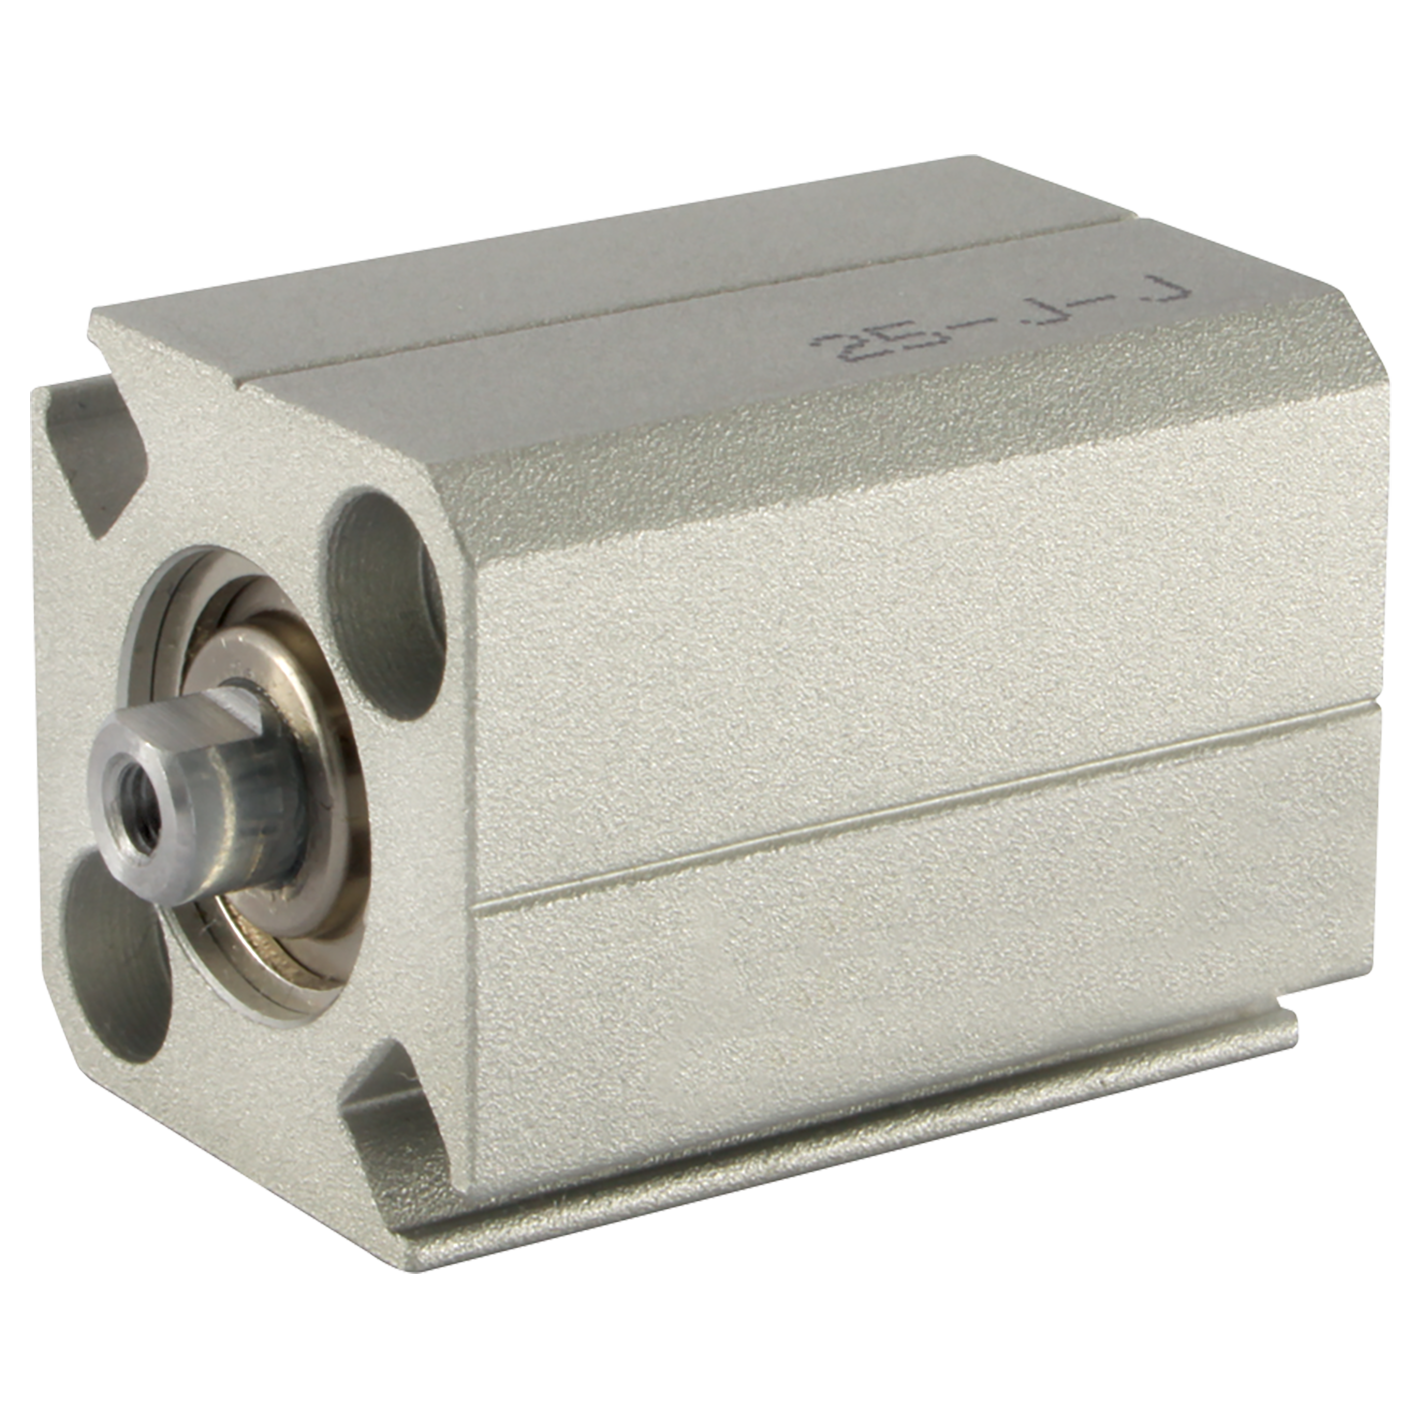 M5 x 0.8 Metric Female Ports Pneumatic Cylinder Compact Cylinder